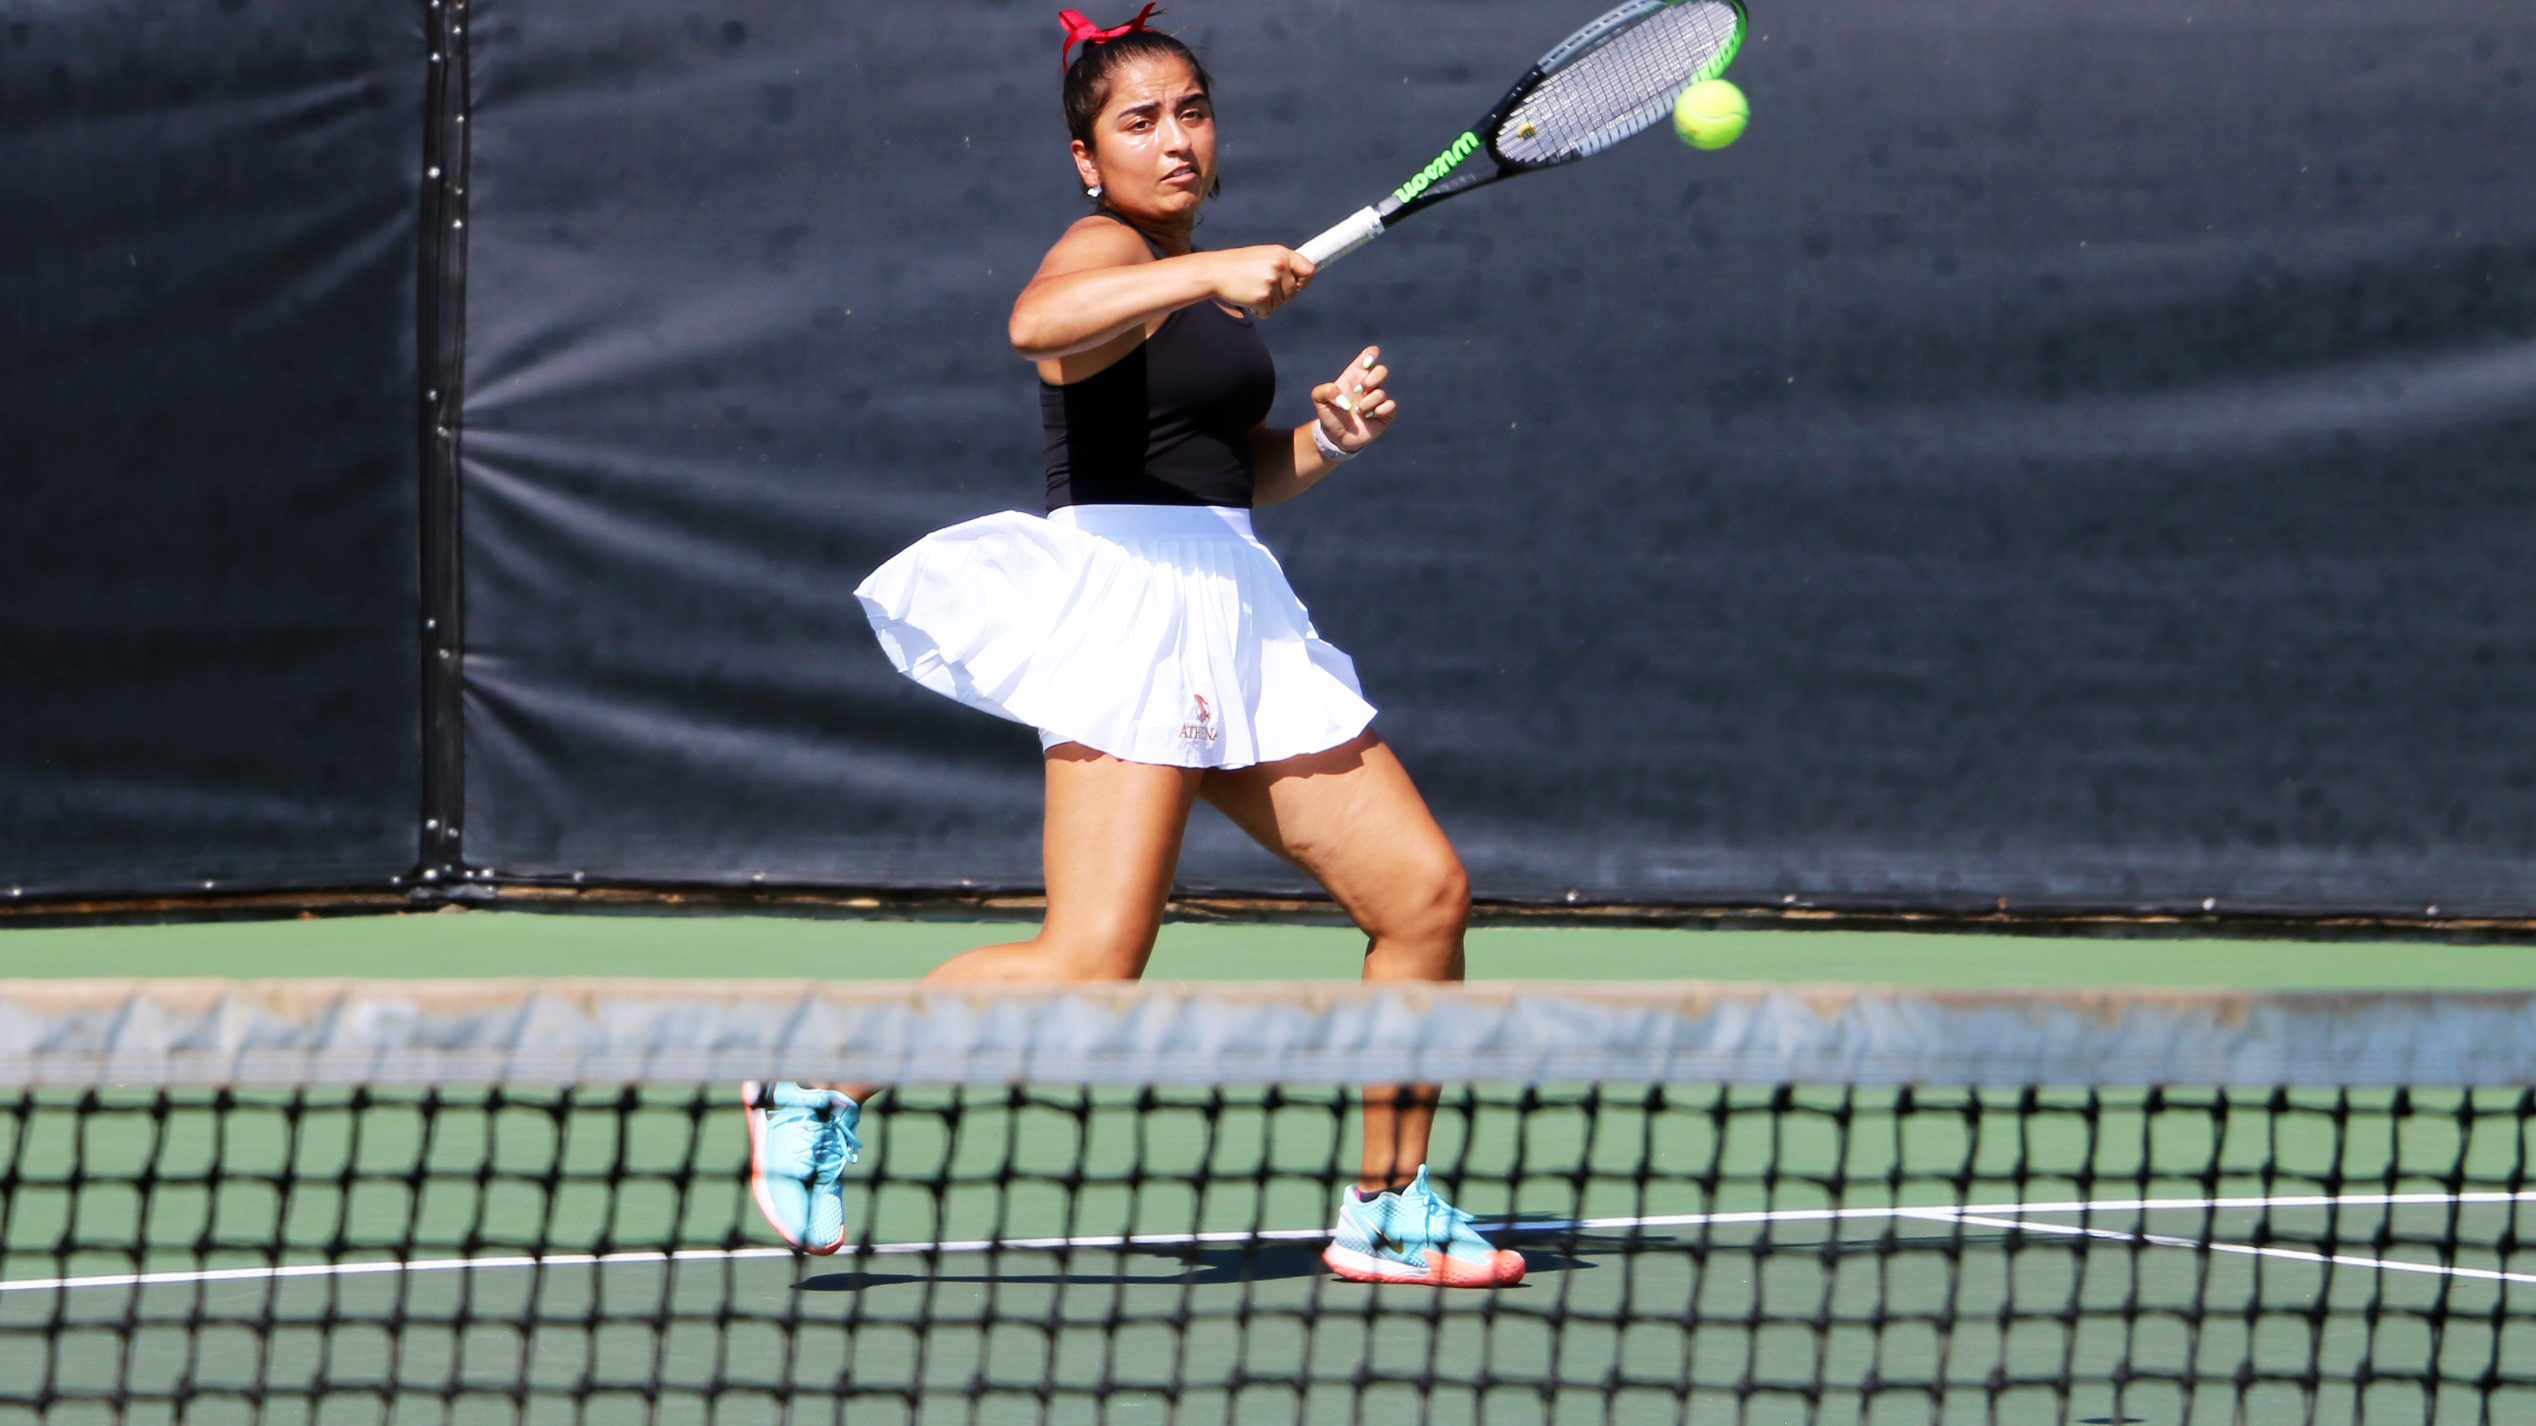 Alisha Chulani went 4-0 on the day, with two singles and two doubles wins